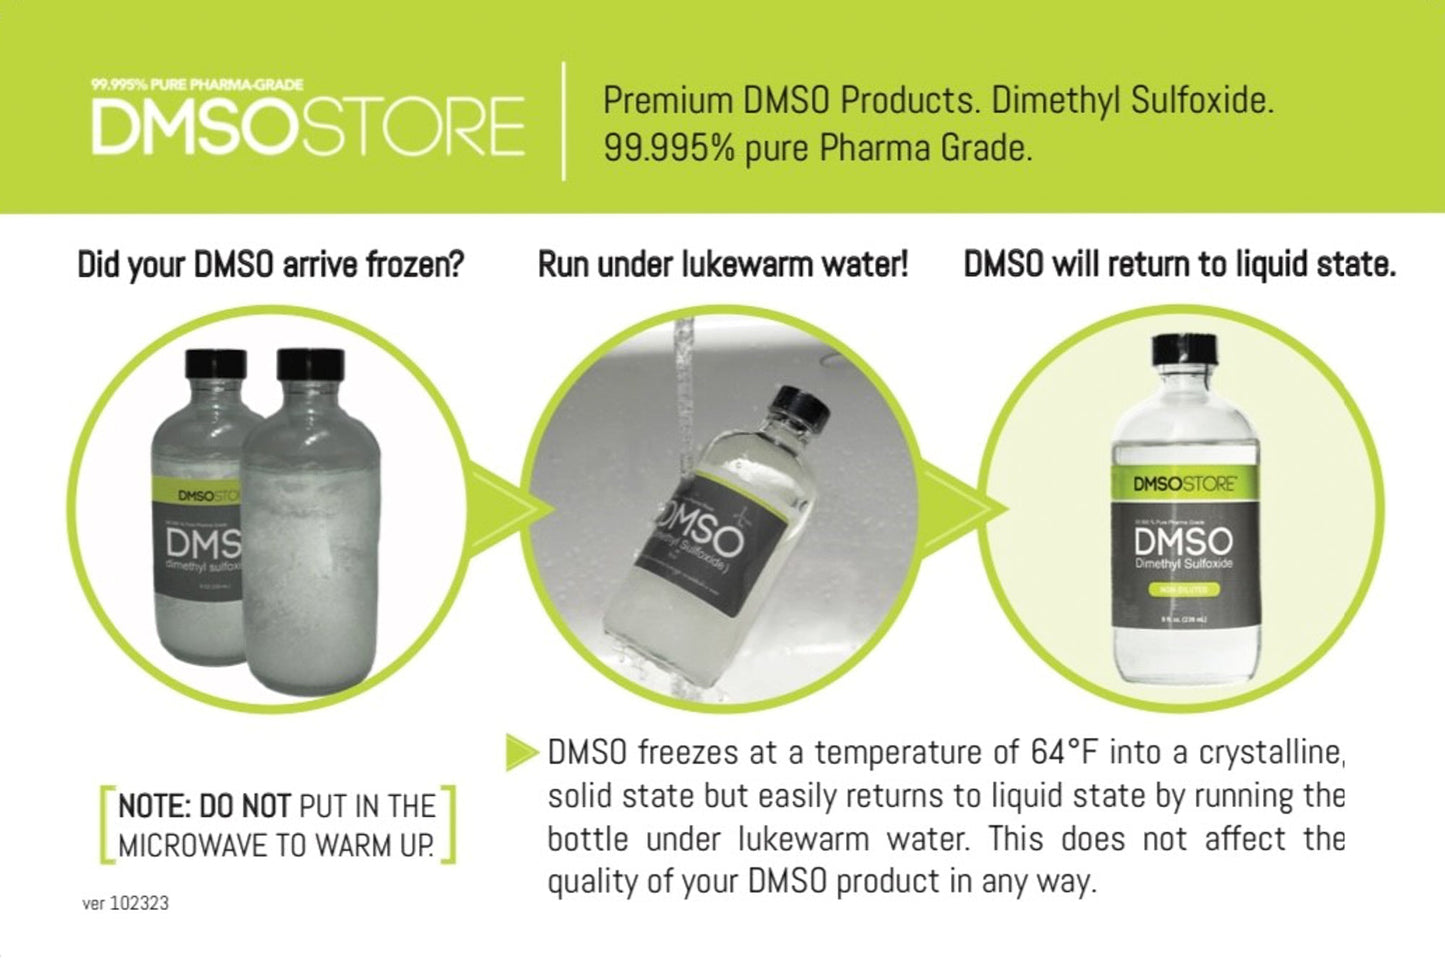 The photo reads: DMSOSTORE Premium DMSO Pain Relief products. Dimethyl Sulfoxide. 99.995% pure Pharma Grade. Manufactured in the USA. Did your DMSO arrive frozen? Run under lukewarm water! DMSO will return to liquid state. NOTE: DO NOT put in the microwave to warm up. DMSO freezes at a temperature of 64 degrees Fahrenheit into a crystalline solid state but easily returns to liquid state by running the bottle under lukewarm water. This does not affect the quality of your DMSO product in any way